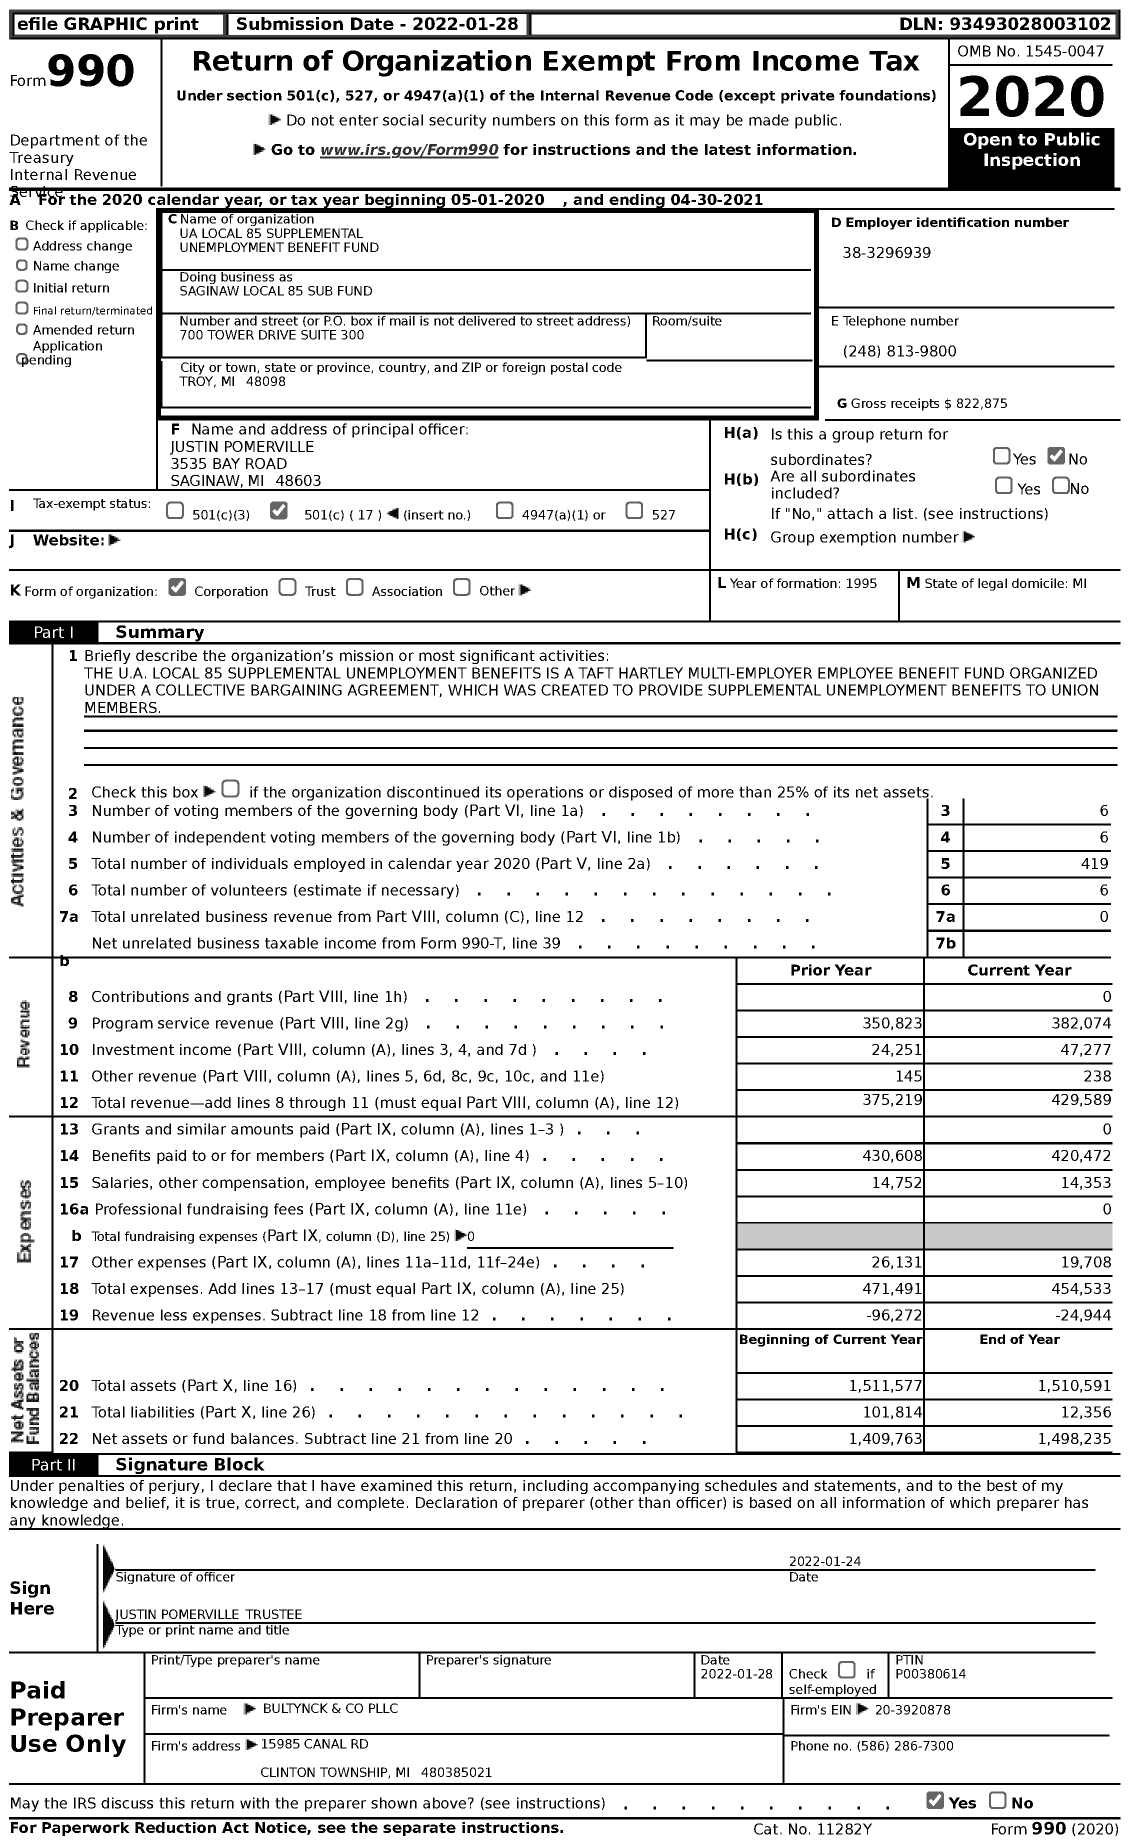 Image of first page of 2020 Form 990 for Saginaw Local 85 Sub Fund